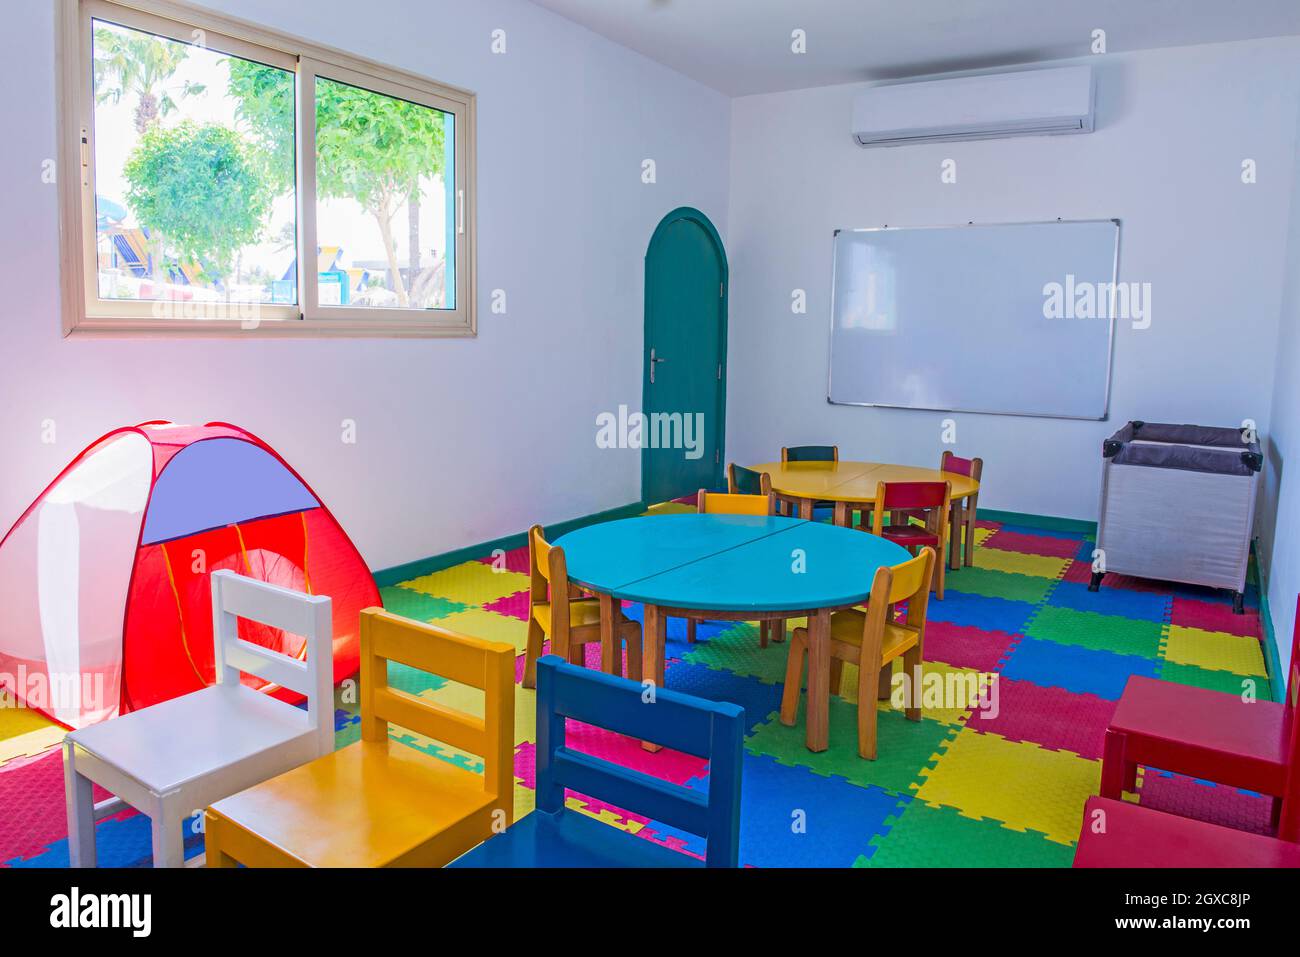 Interior design of large colorful childrens play room area kids club in hotel with games and toys Stock Photo